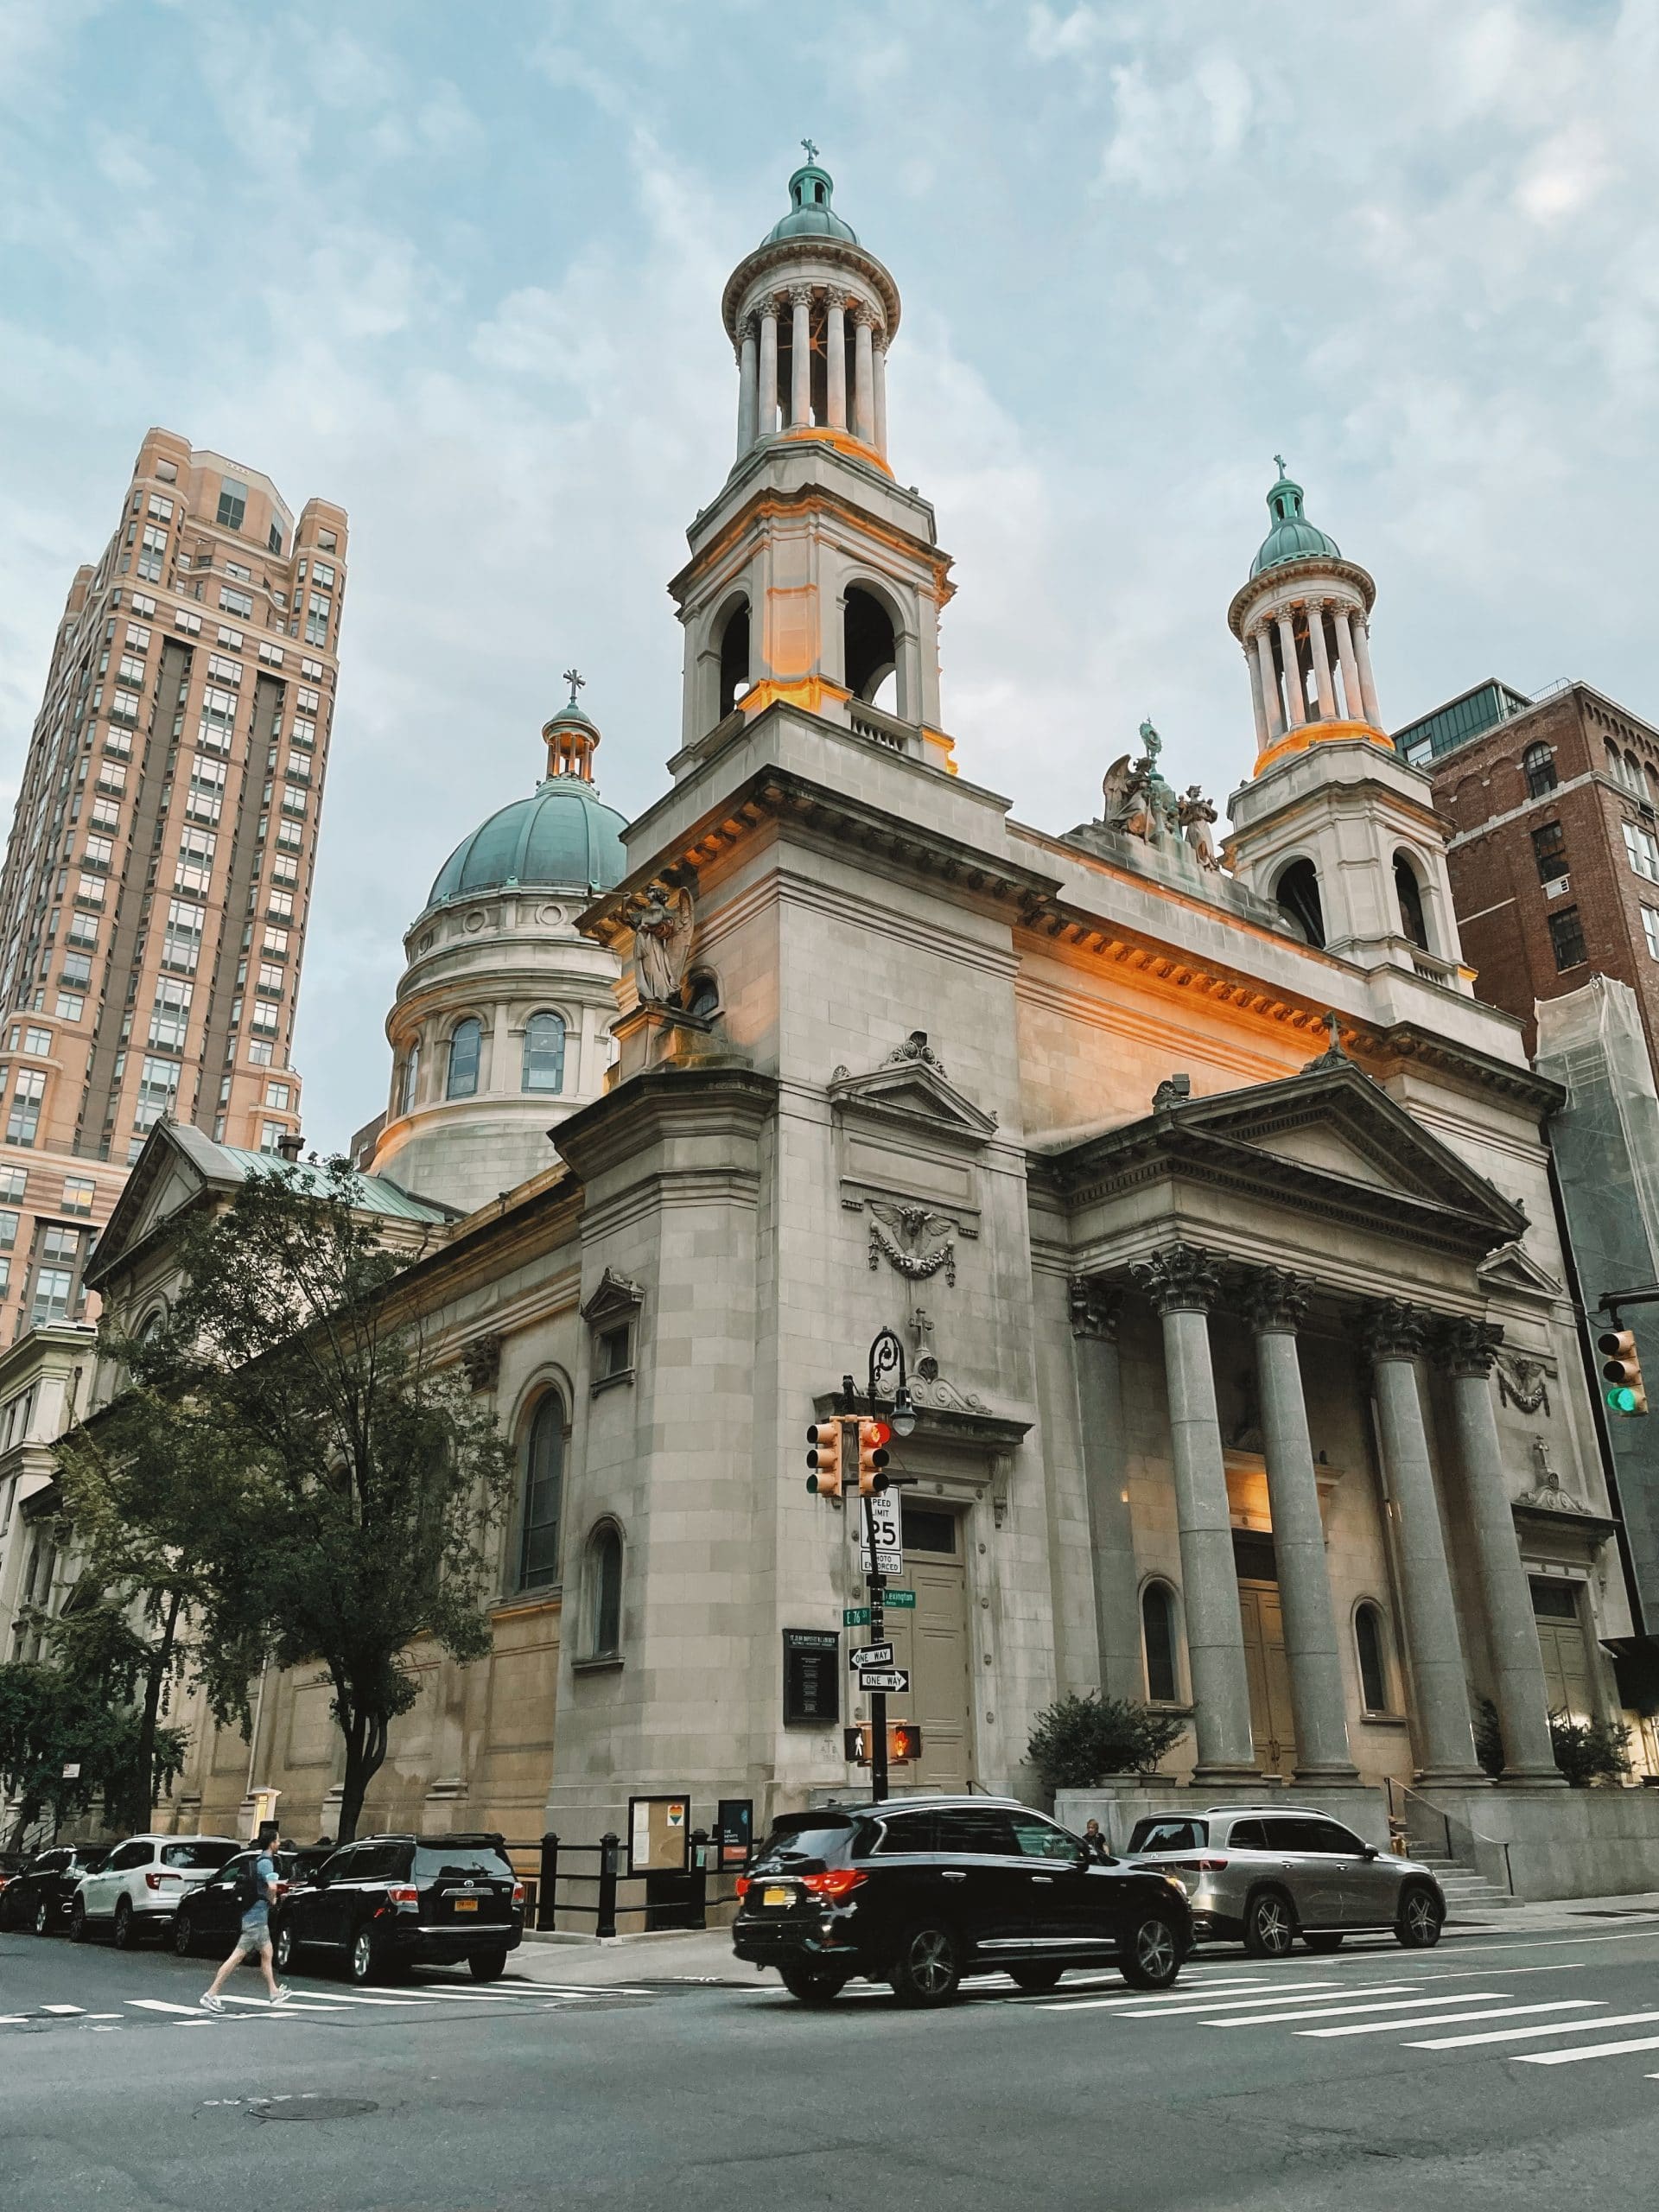 St. Jean Baptiste Church in NYC
Most beautiful churches NYC